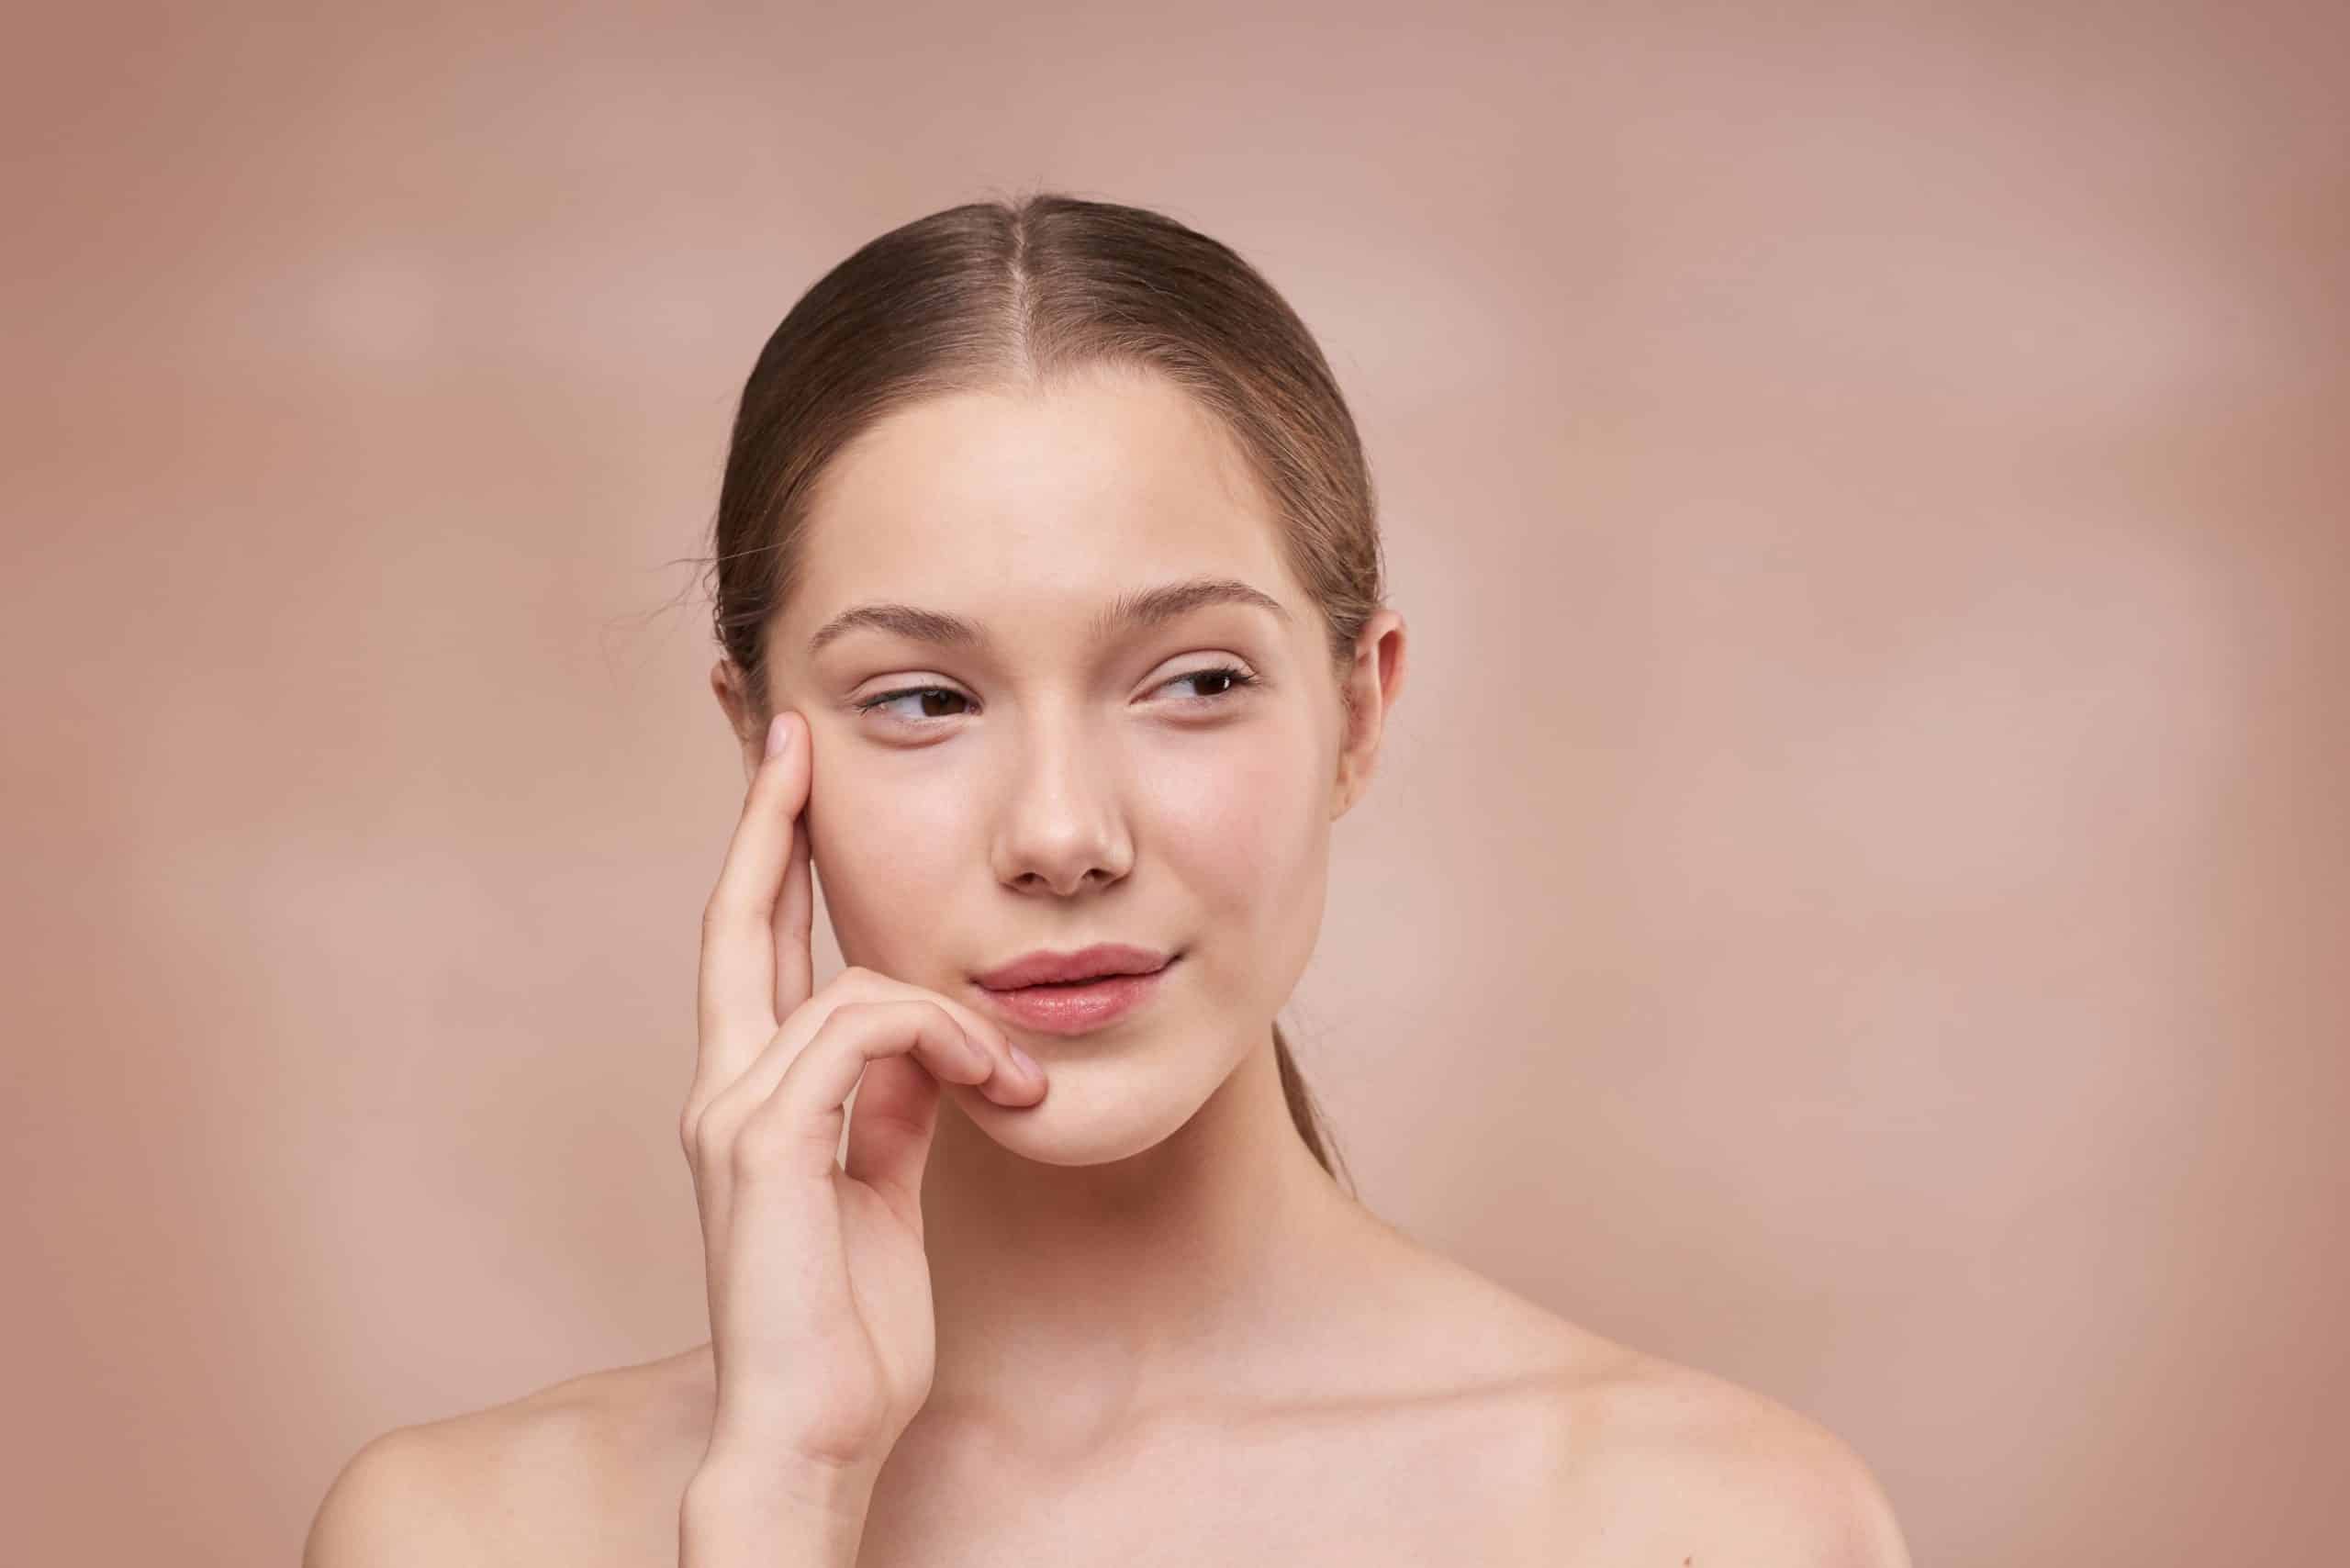 The rise of plump primers: A deep dive into the latest skincare trend sweeping TikTok